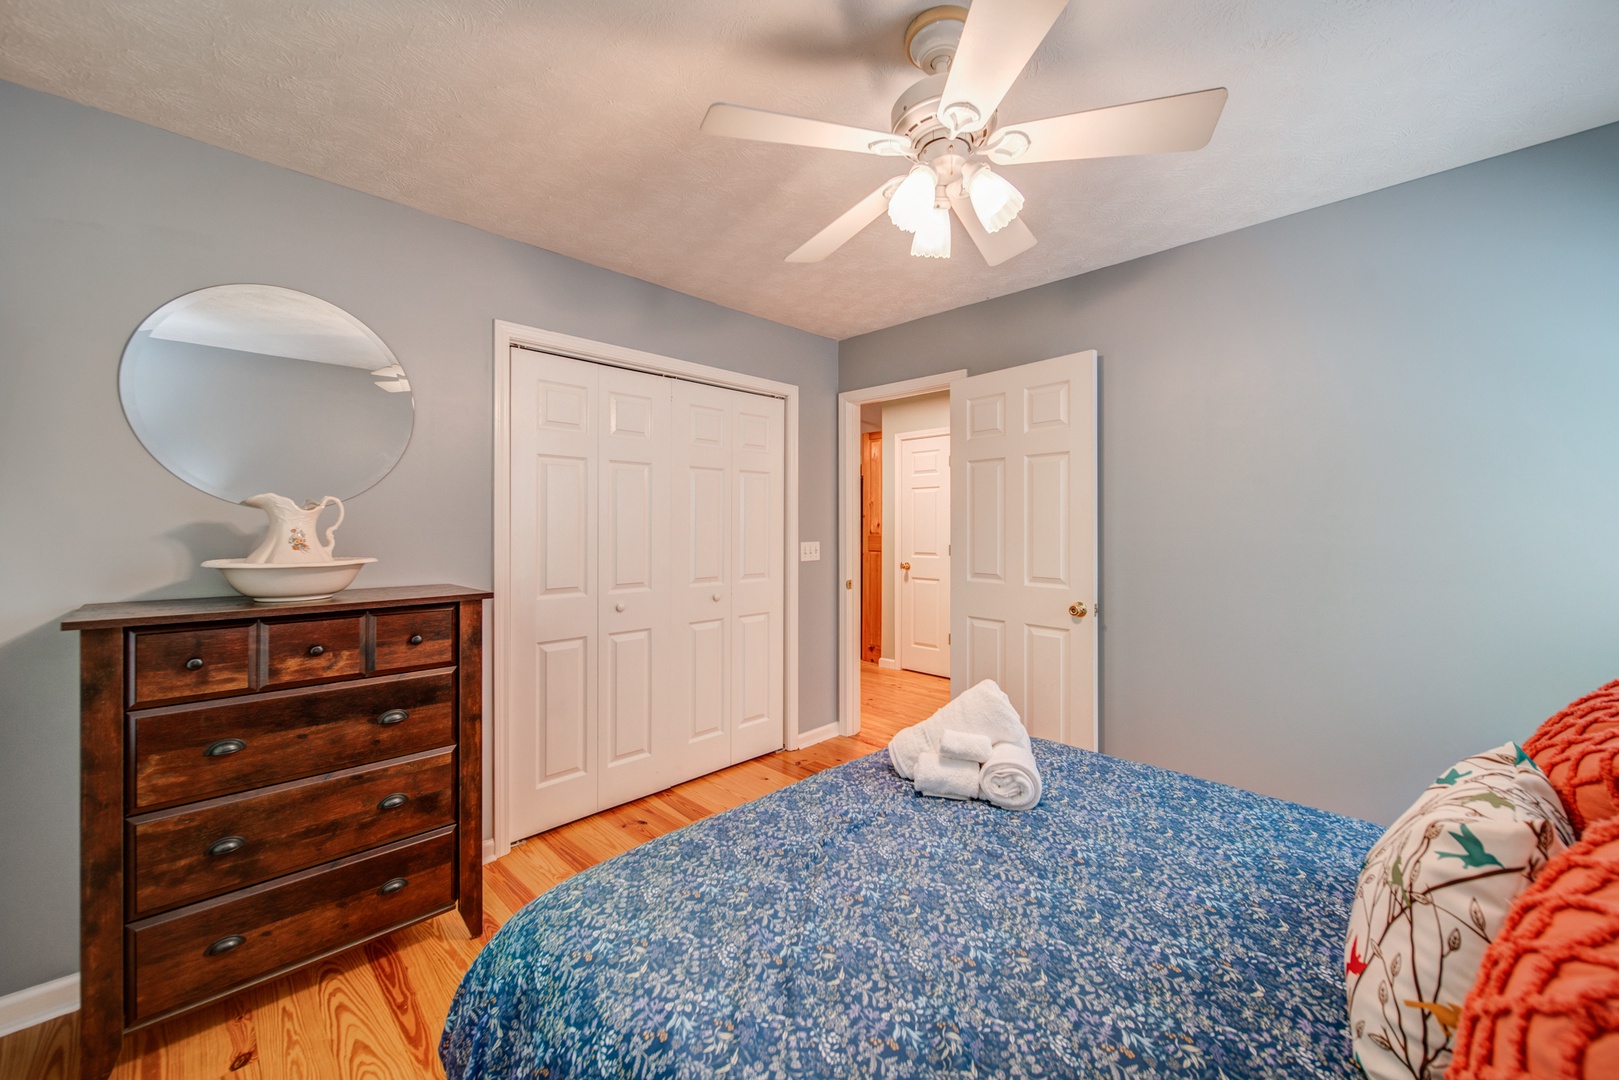 The first of two queen bedrooms, with a dresser & ceiling fan